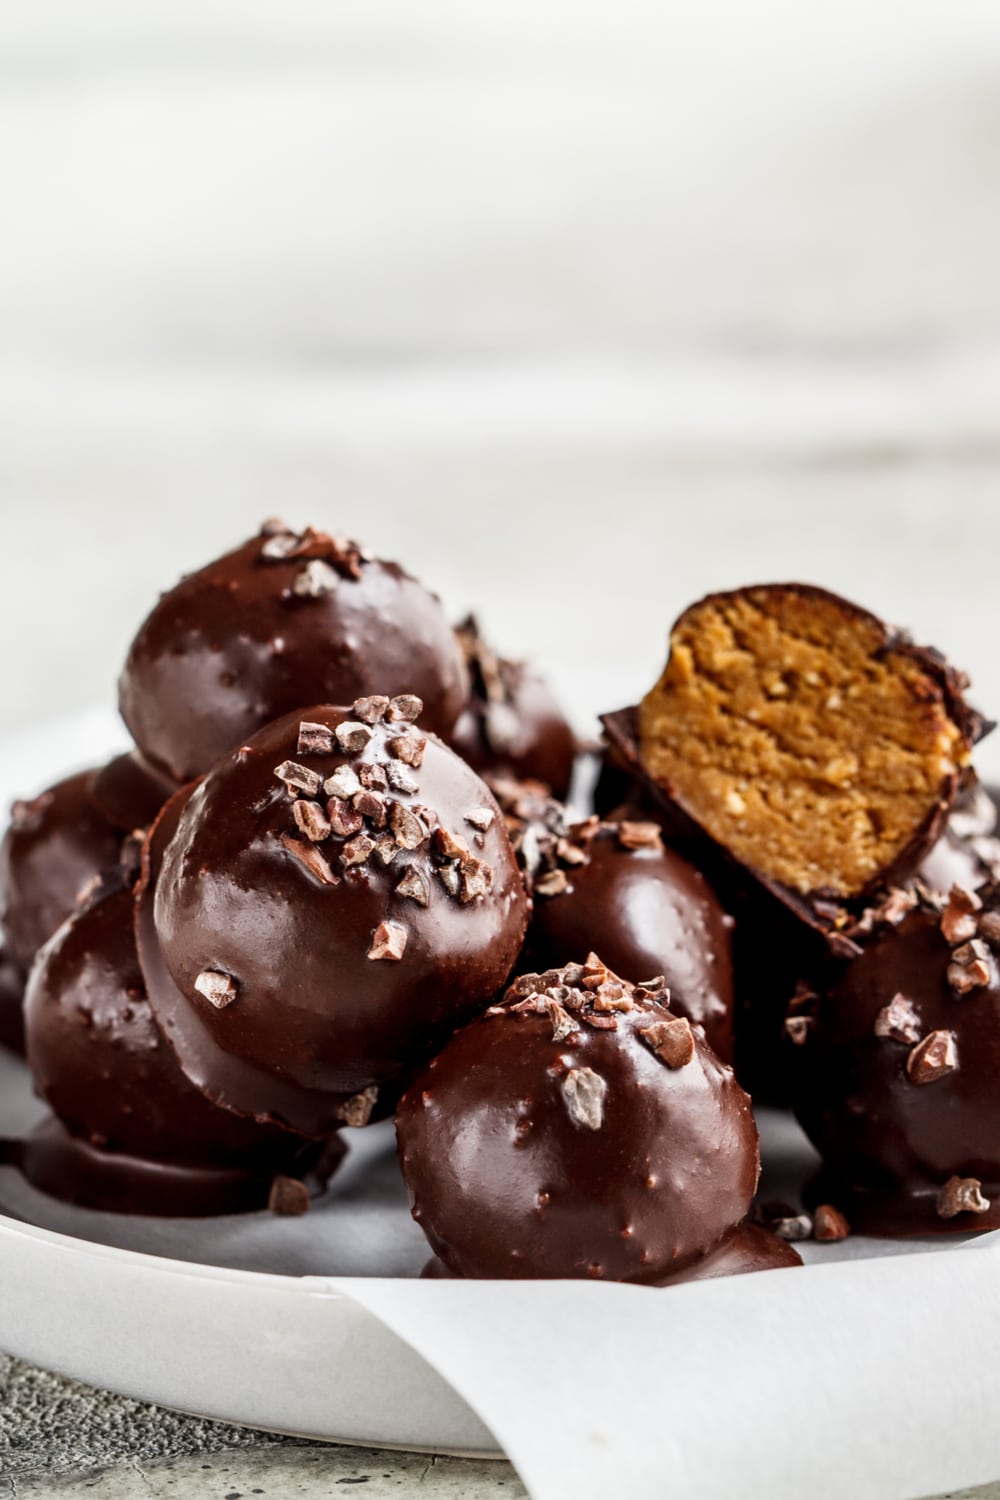 Bunch of chocolate coated peanut butter balls with crushed pretzels.